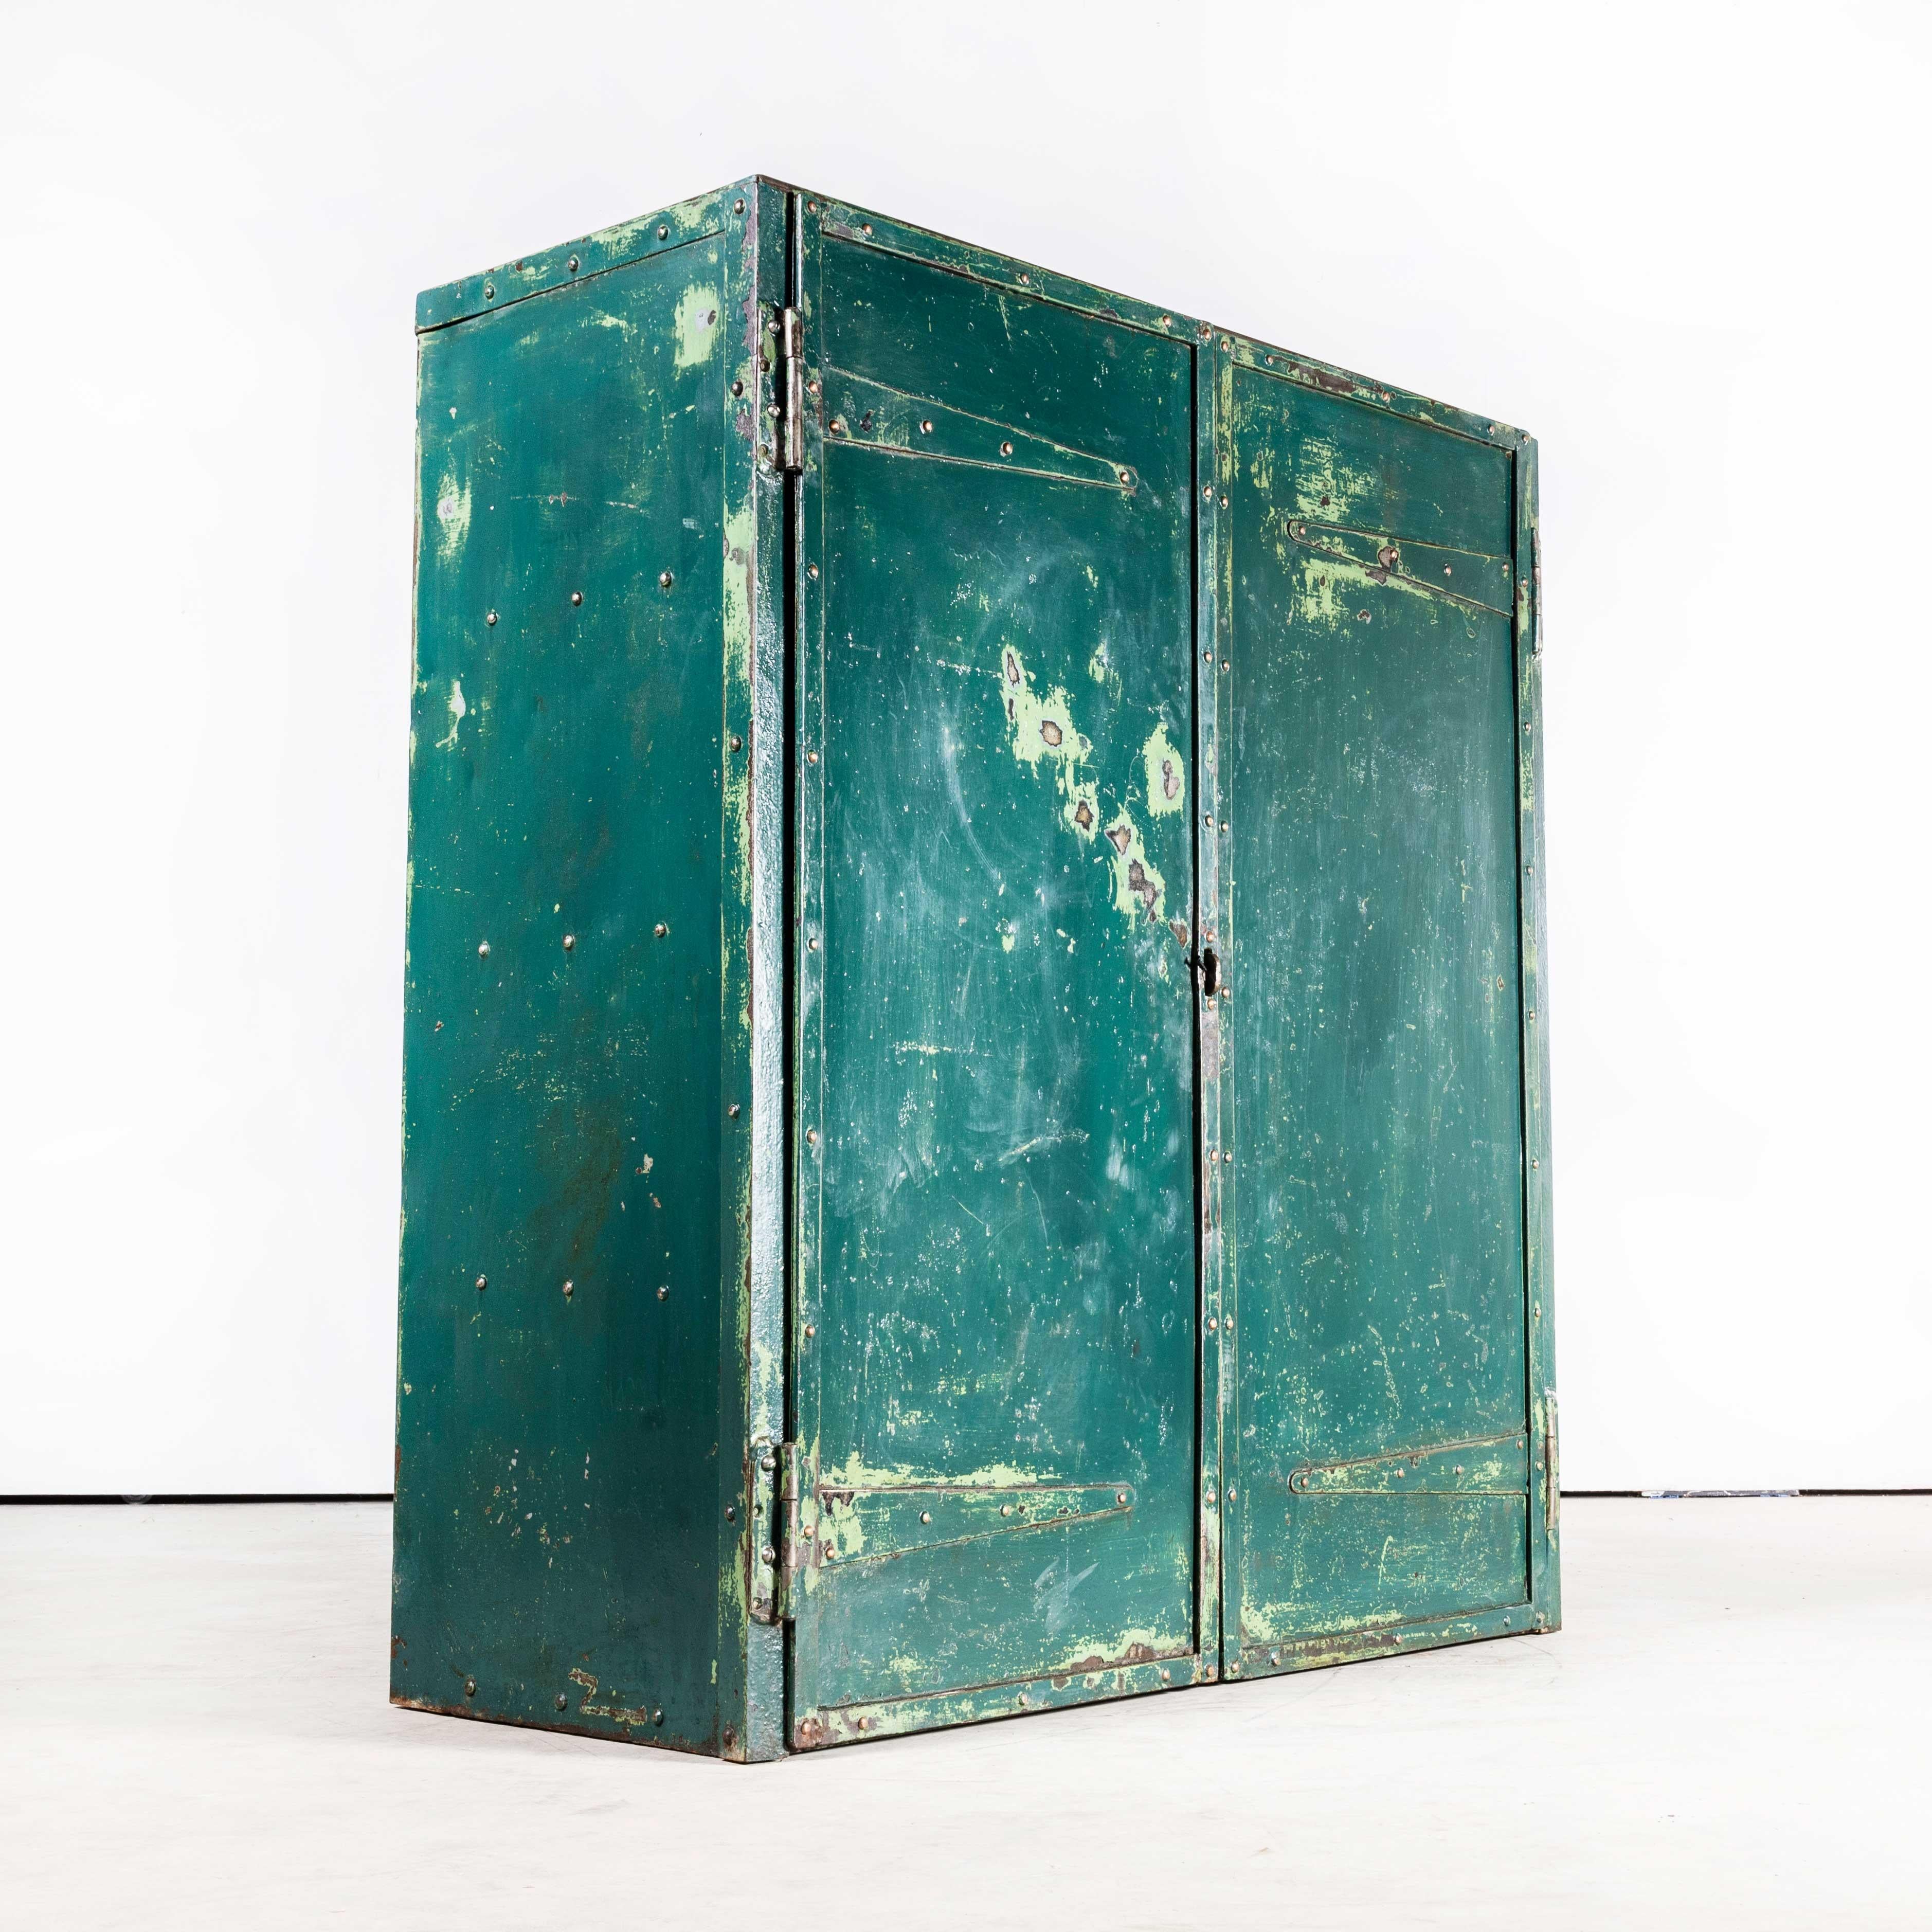 1950’s Industrial Metal Storage Cabinet – With Large Strap Hinges
1950’s Industrial Metal Storage Cabinet – With Large Strap Hinges. Sourced from a steel foundry outside Manchester this well proportioned heavy duty cabinet was used to store the